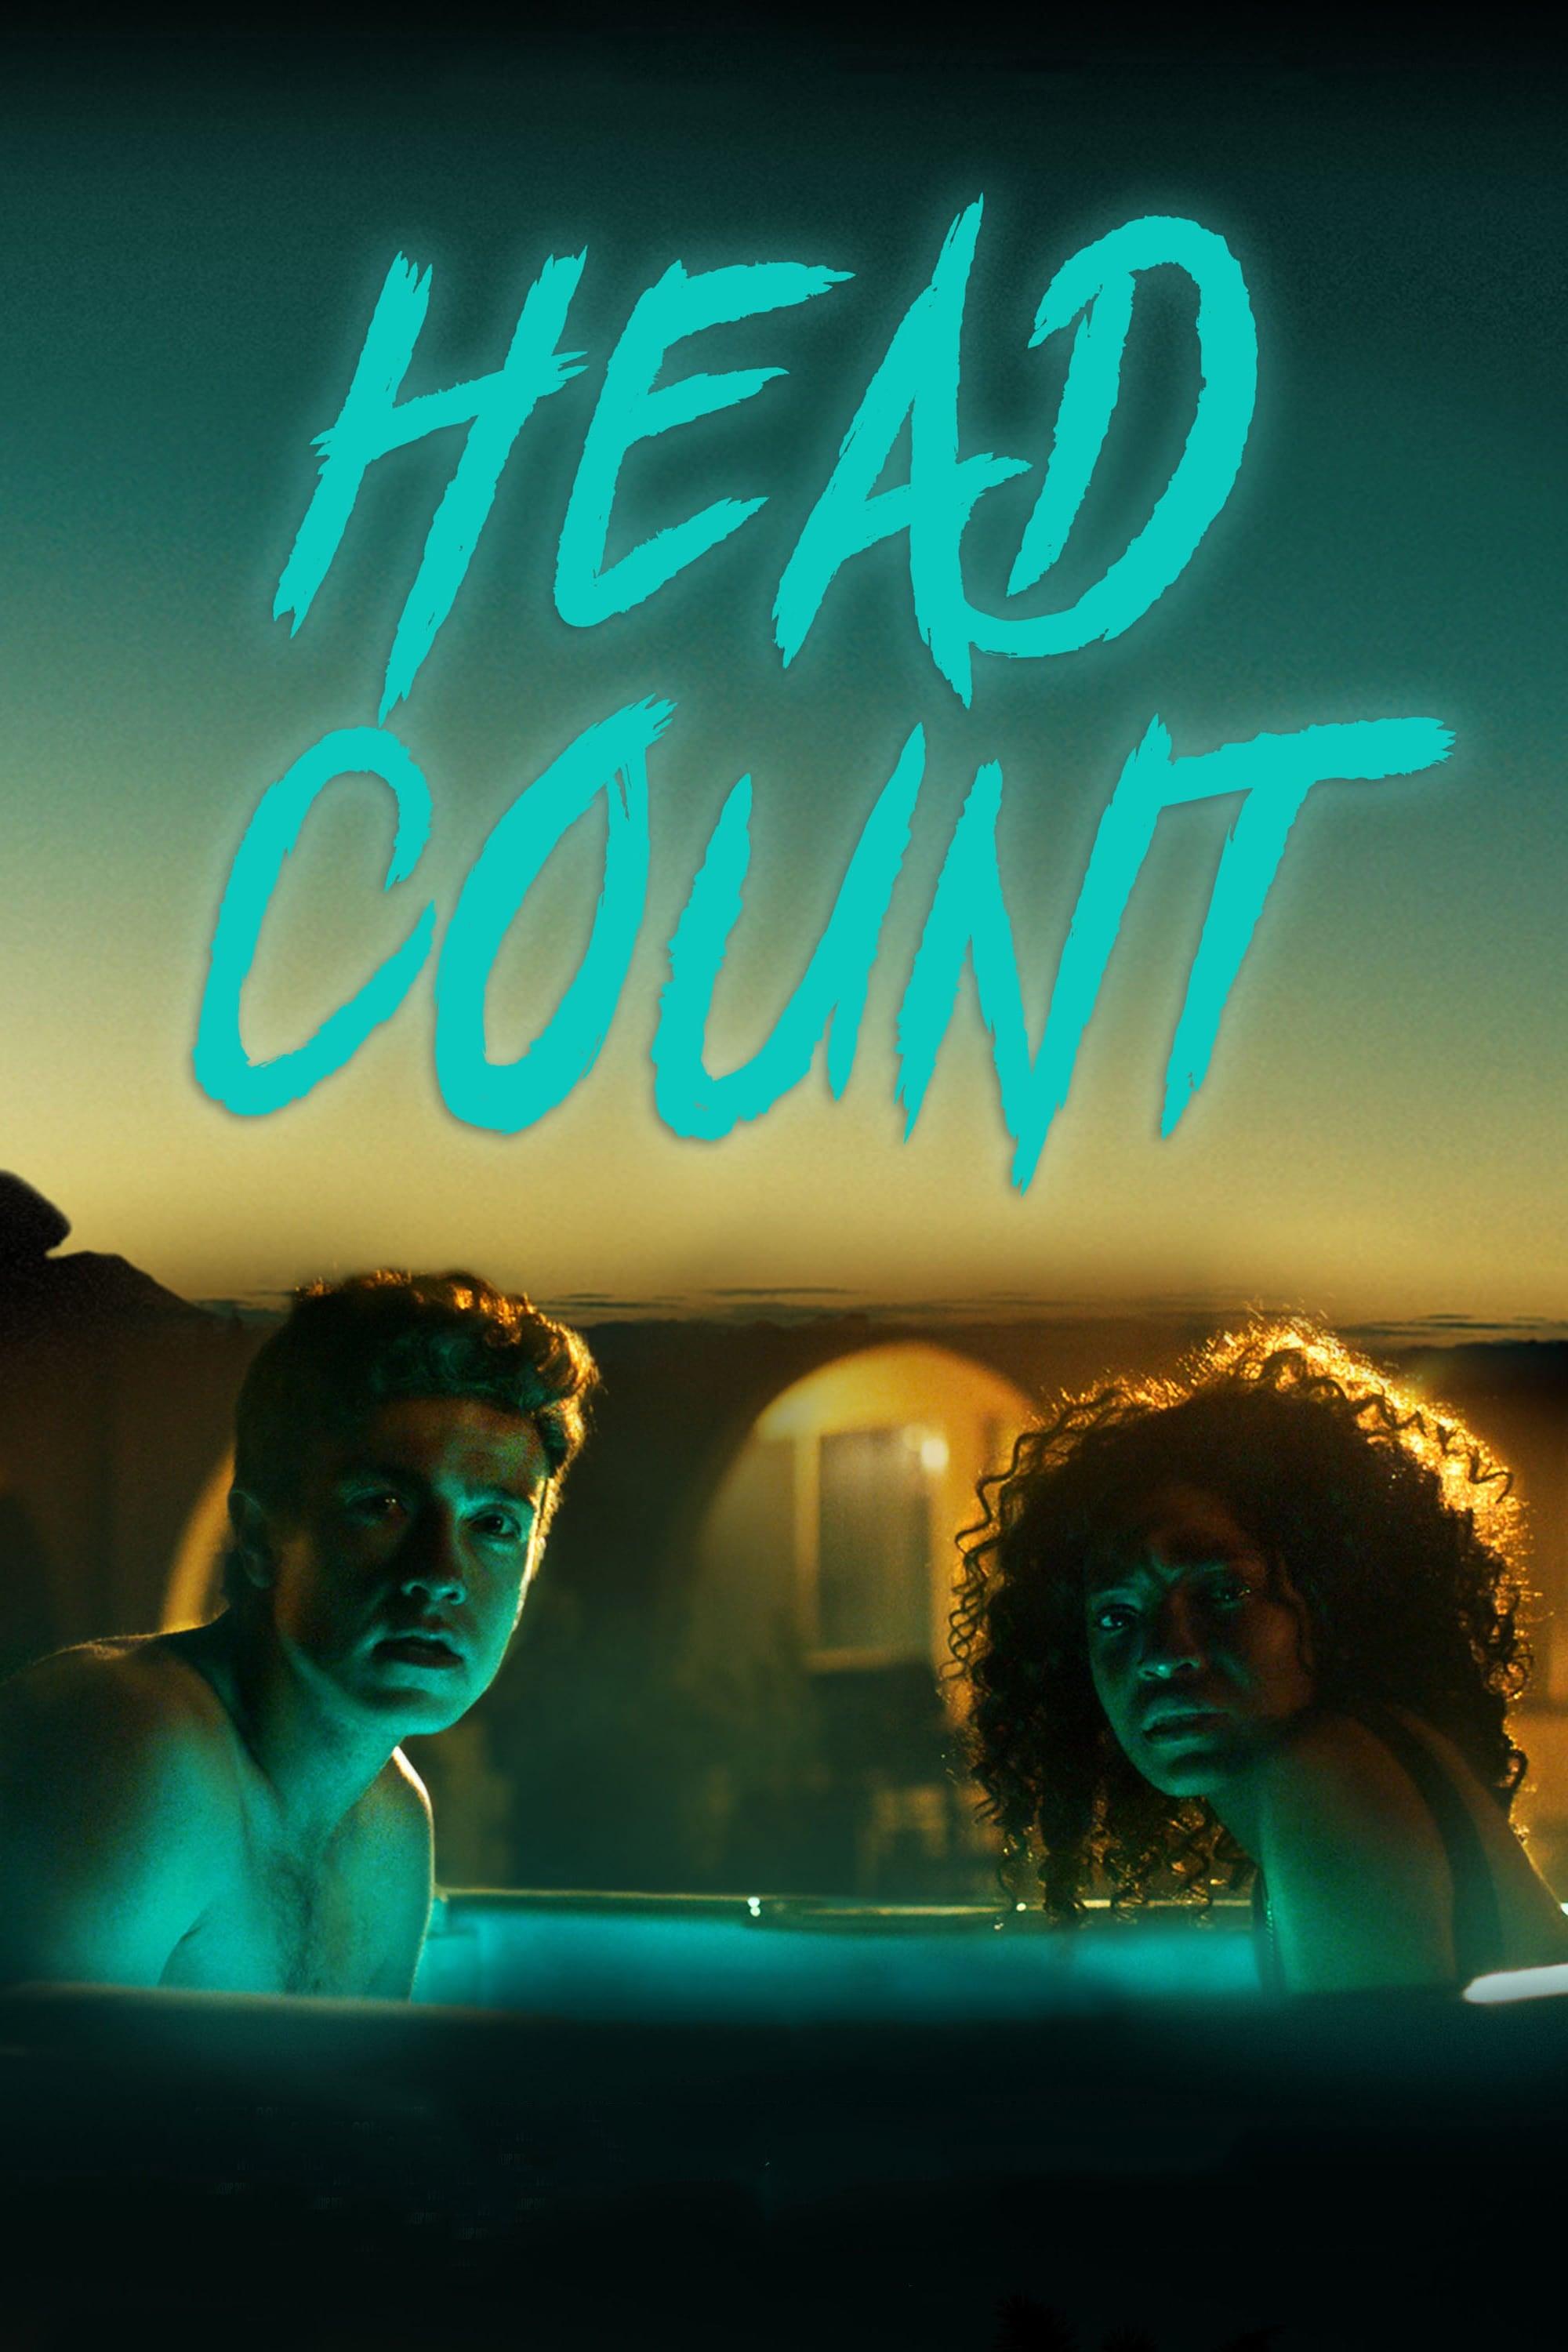 Head Count poster